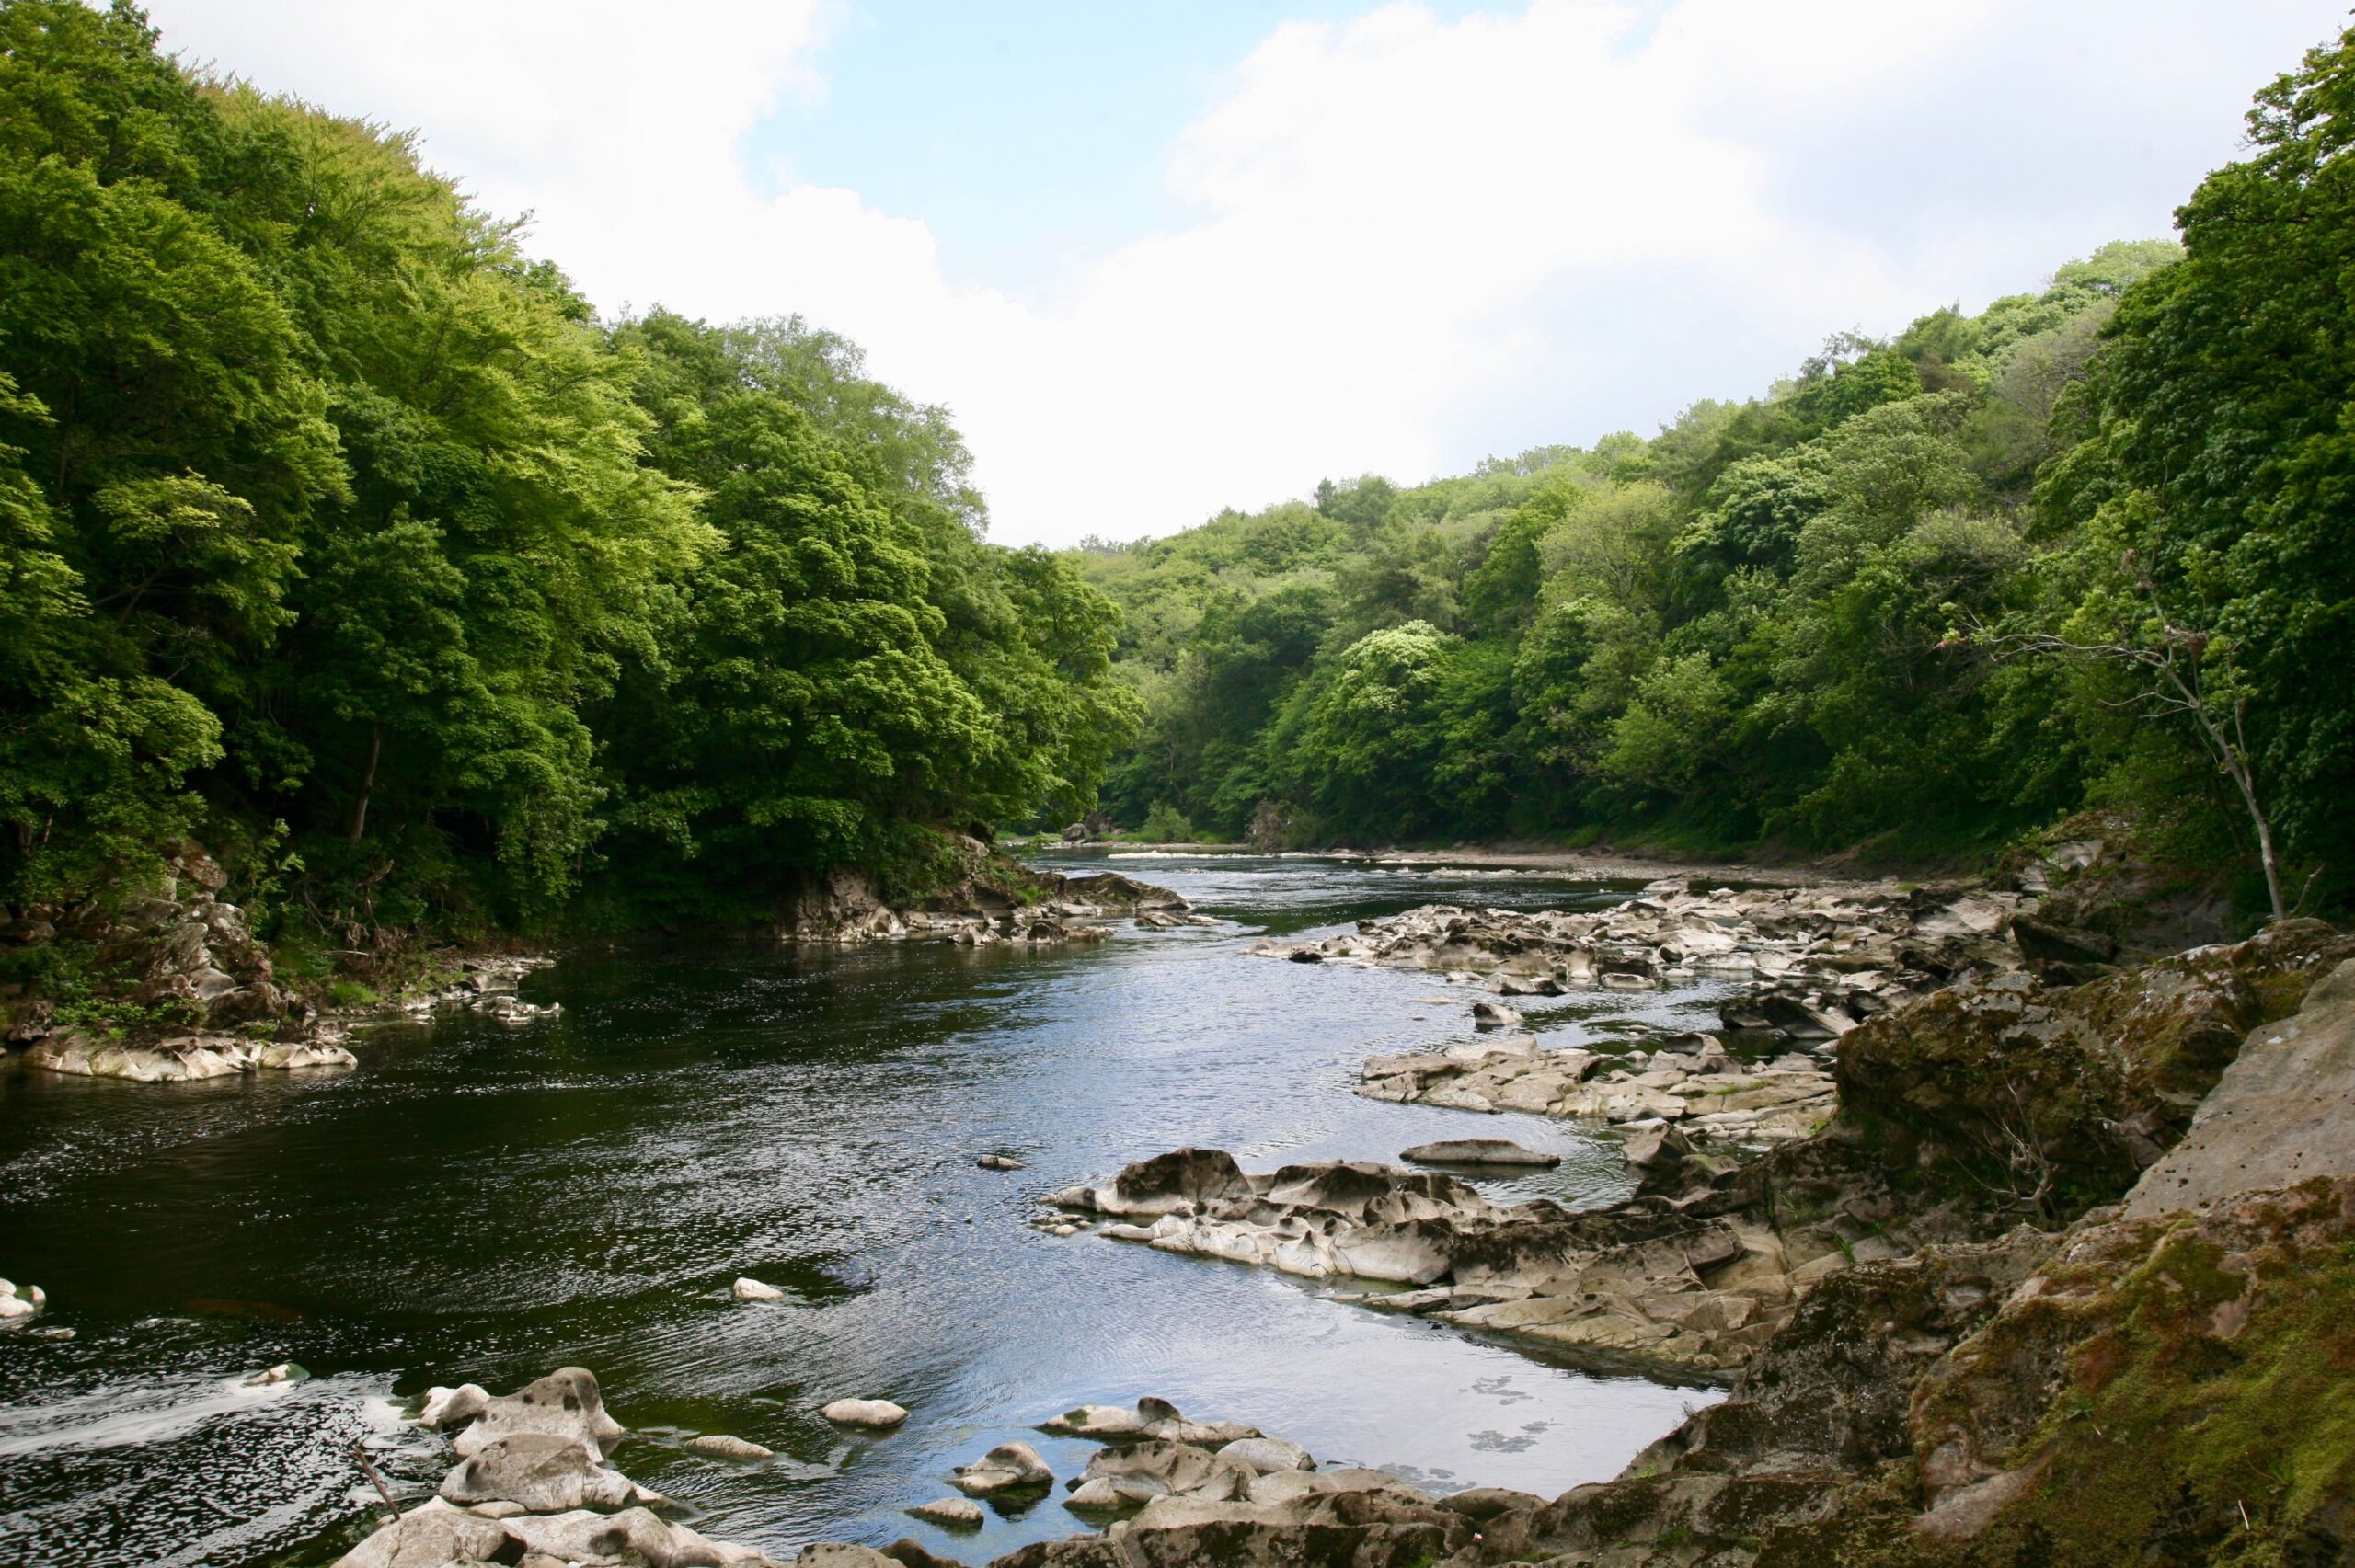 A view of the River Ribble close to Ribchester near Preston, Lancashire